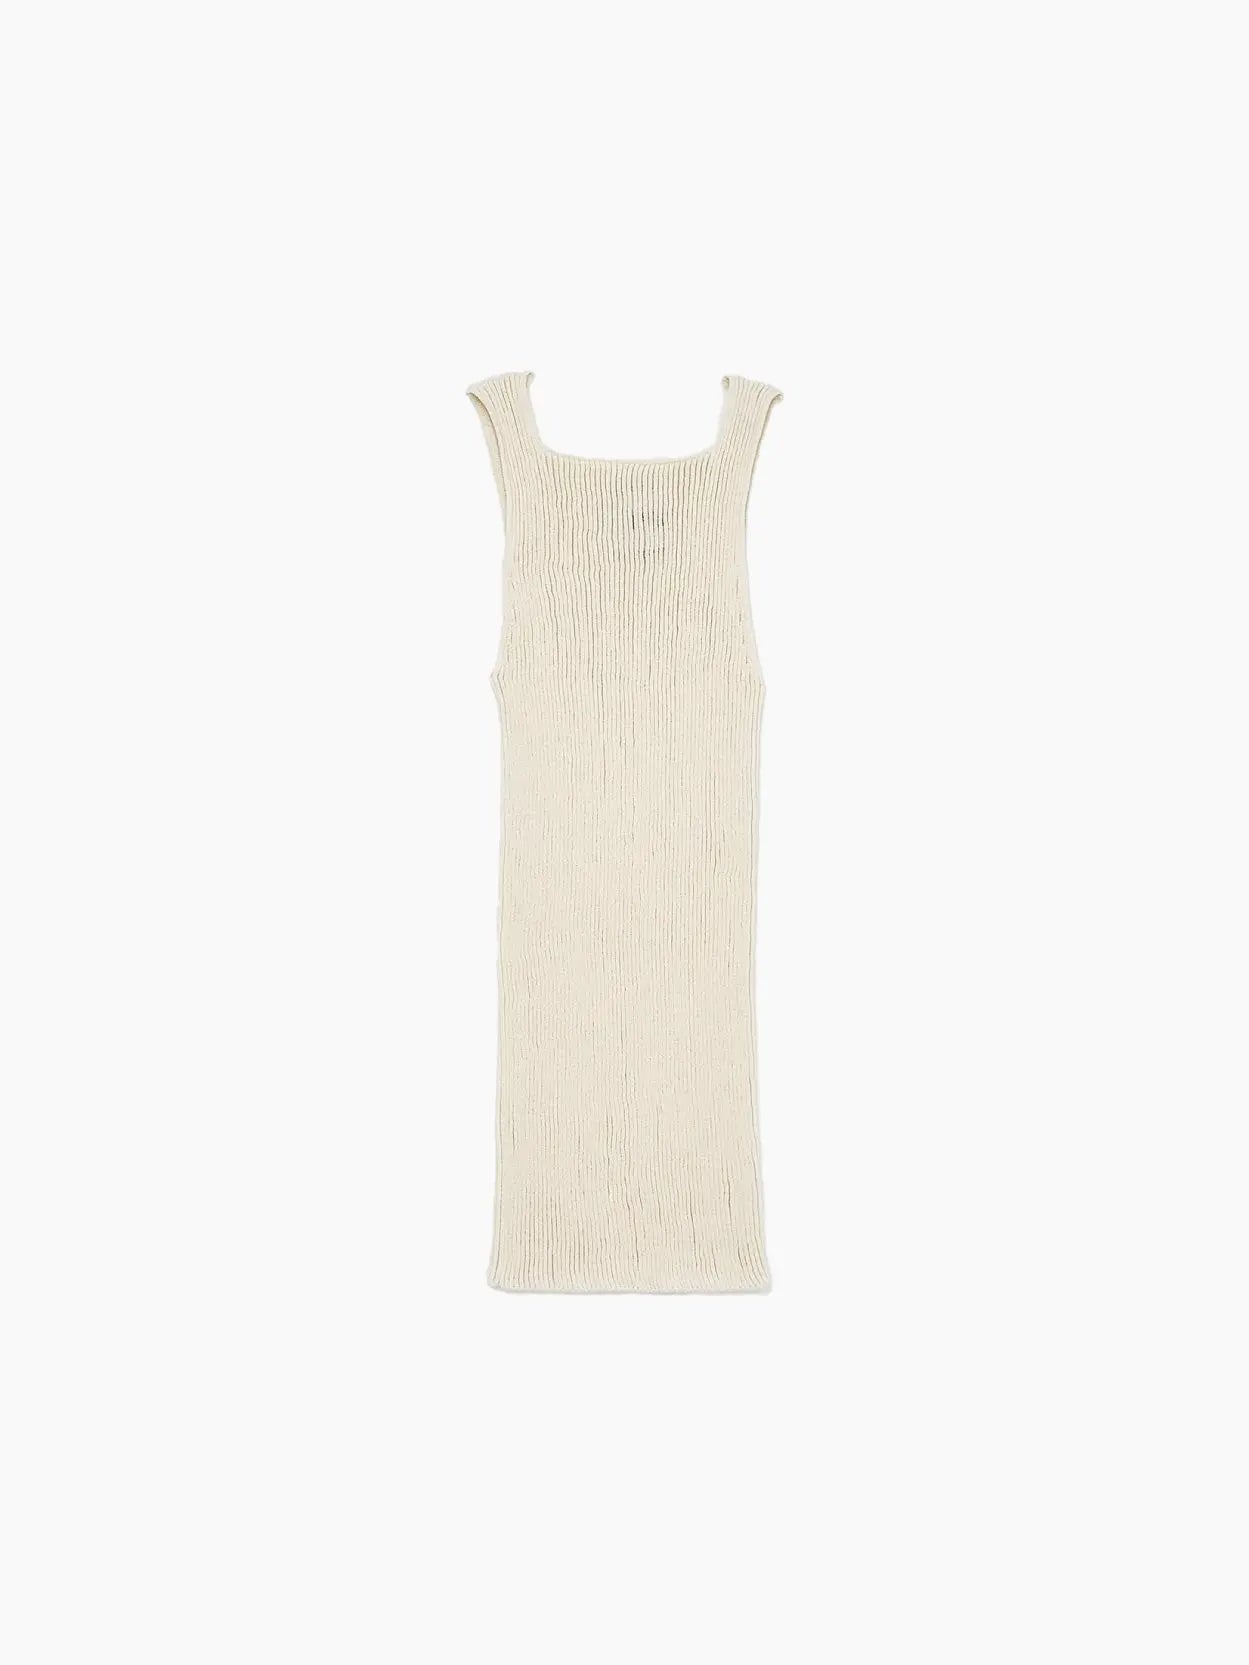 A sleeveless, knitted, cream-colored Junko Top Chalk by Rus is displayed against a white background. The top has a simple, straight cut and a square neckline, perfect for a summer stroll in Barcelona. Available now at Bassalstore.